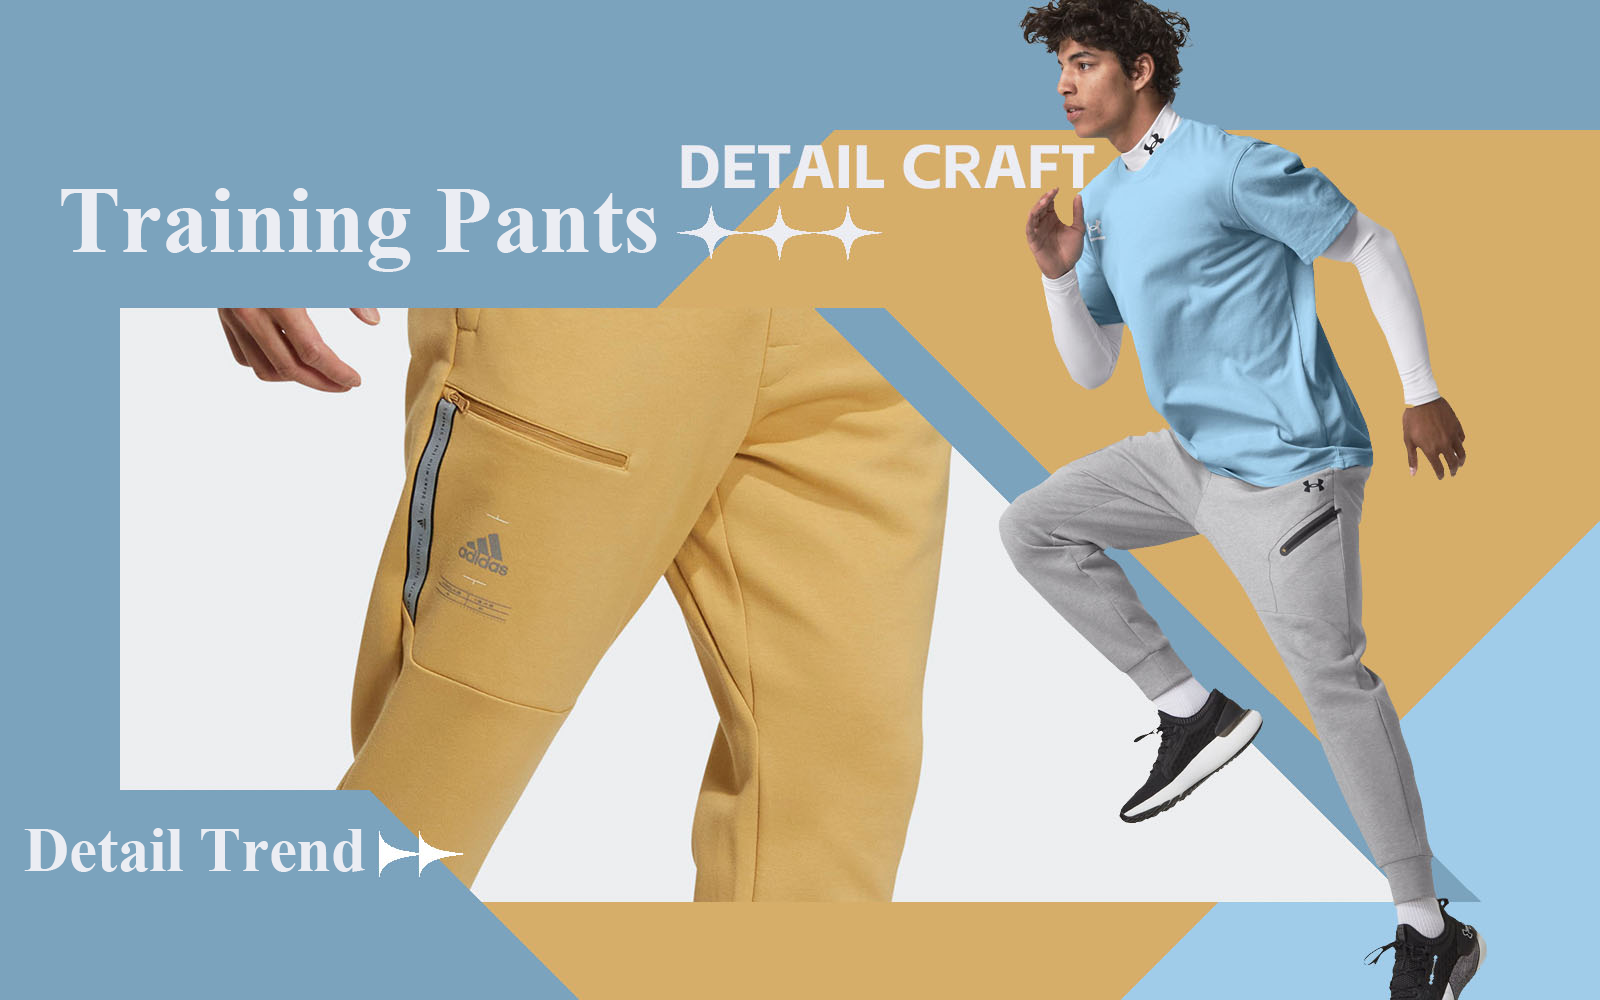 The Detail & Craft Trend for Training Pants